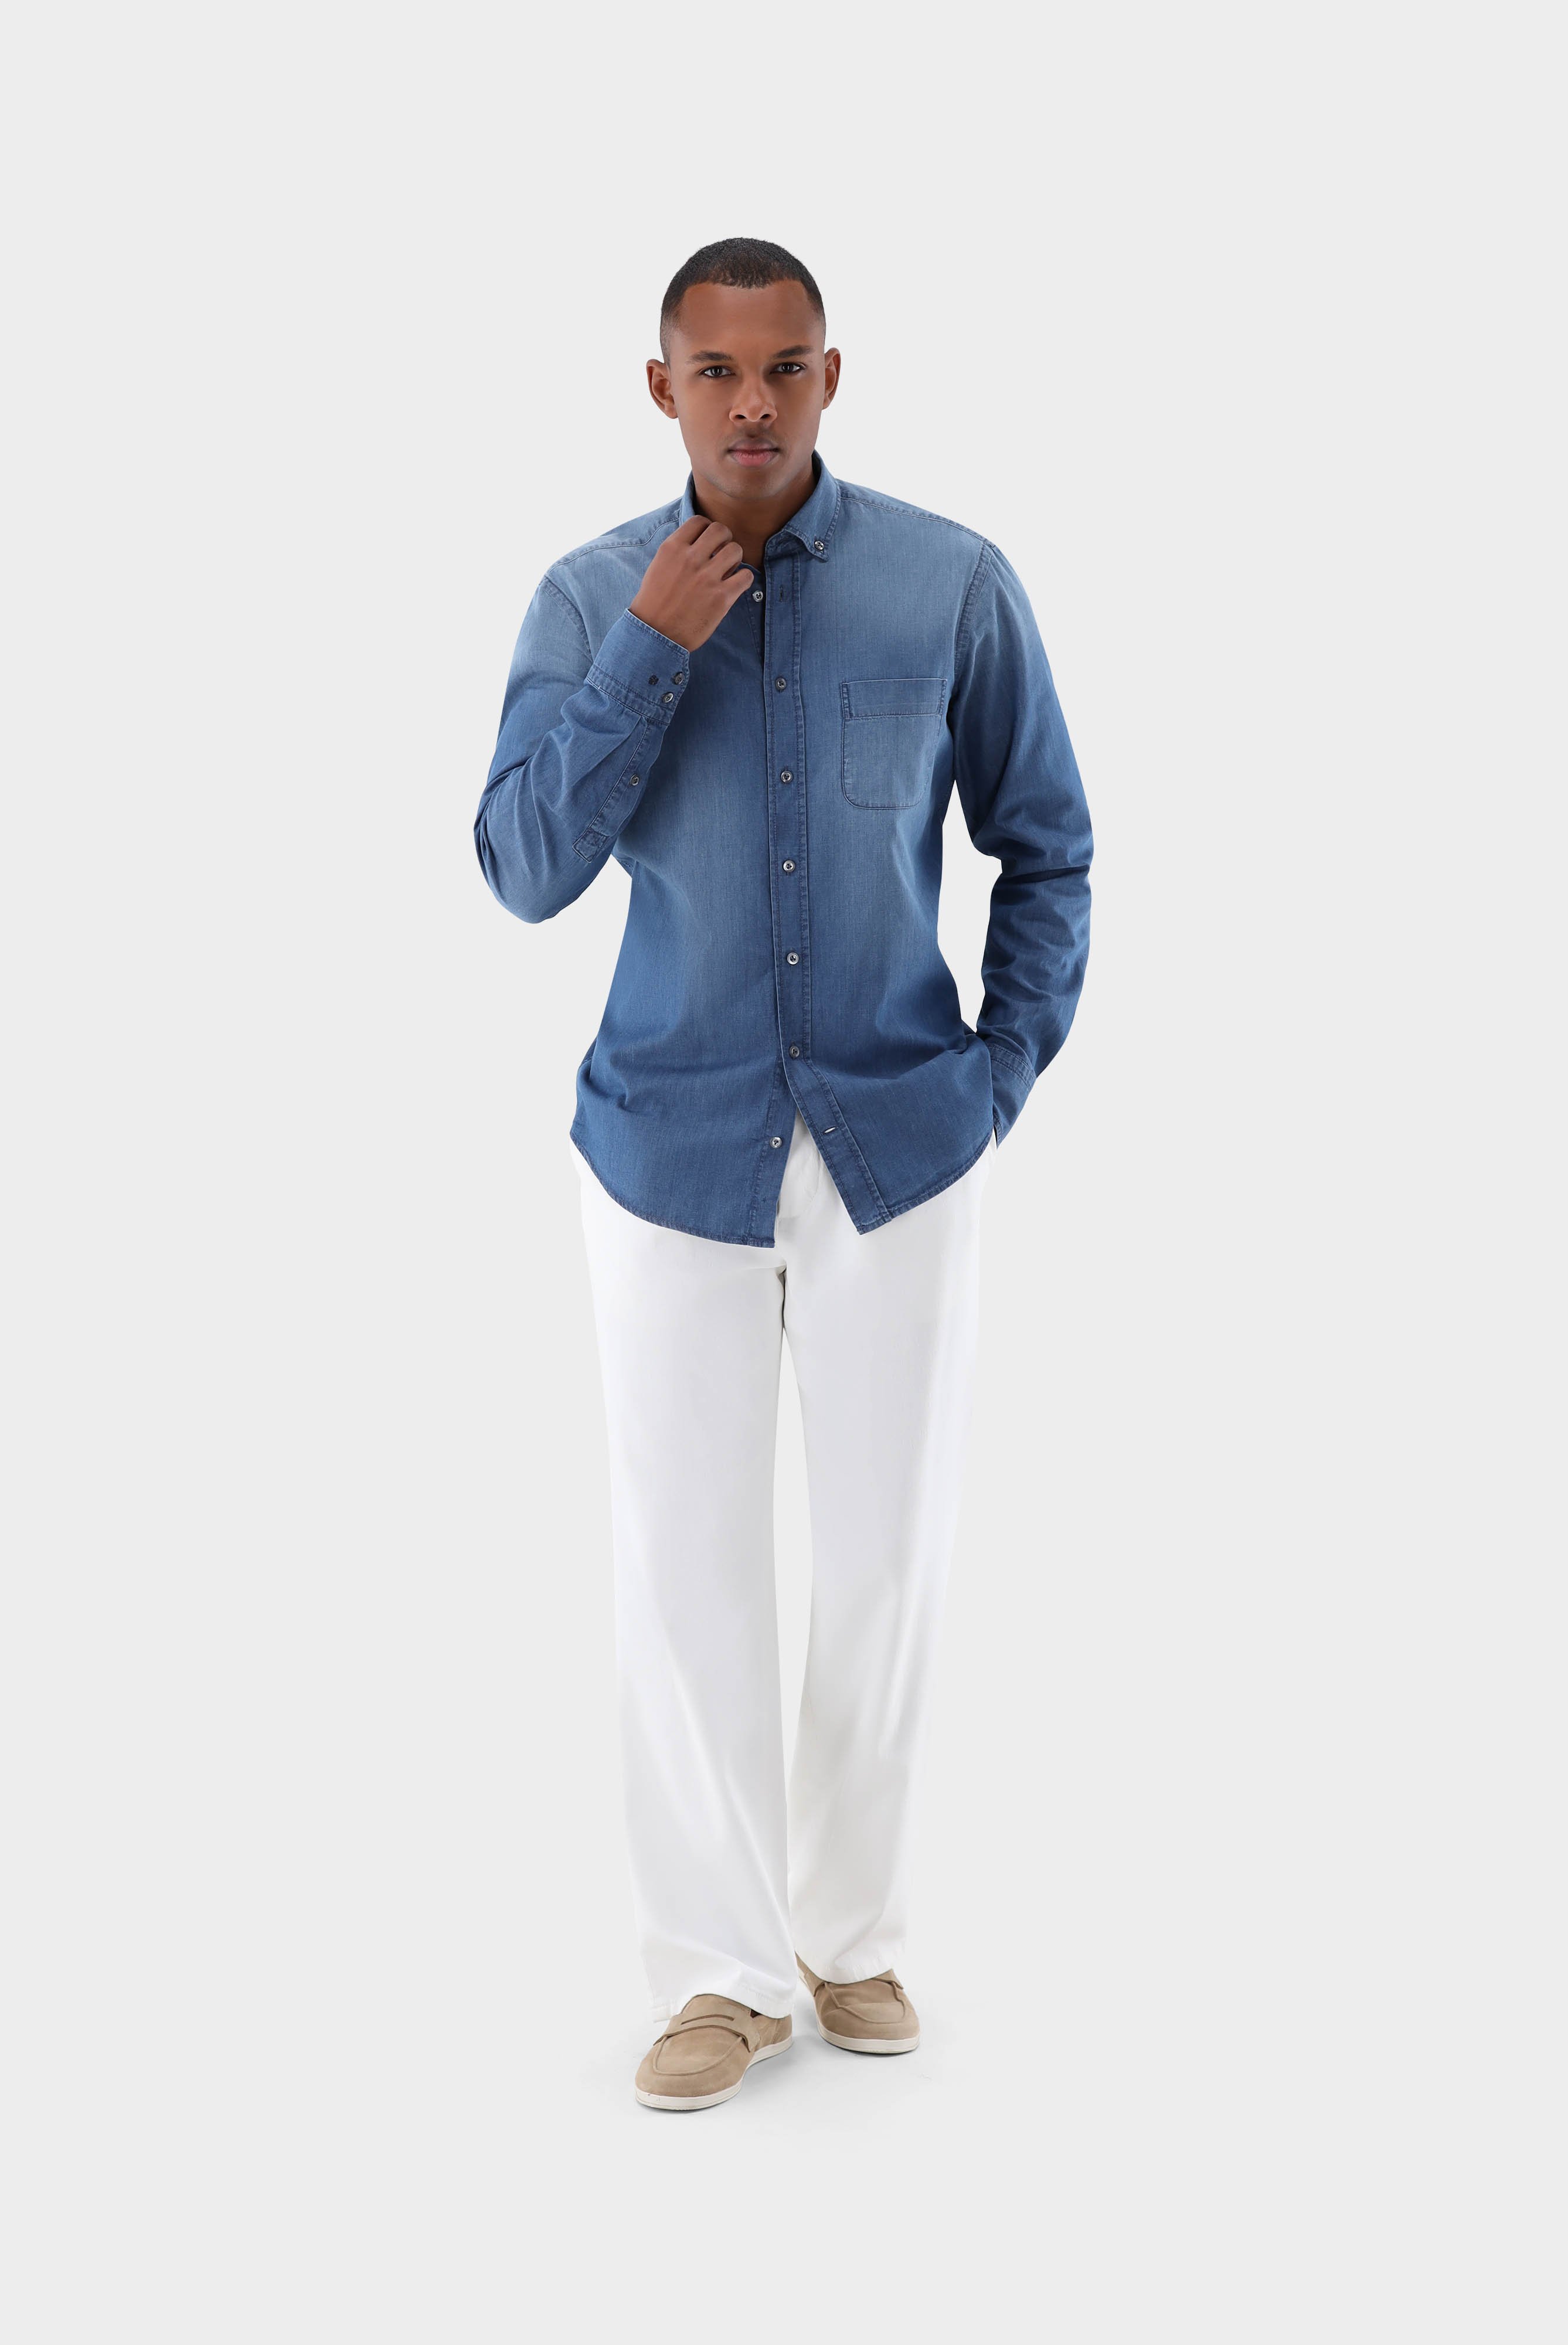 Casual Shirts+Jeans Hemd Tailor Fit+20.2013.ET.155330.740.40